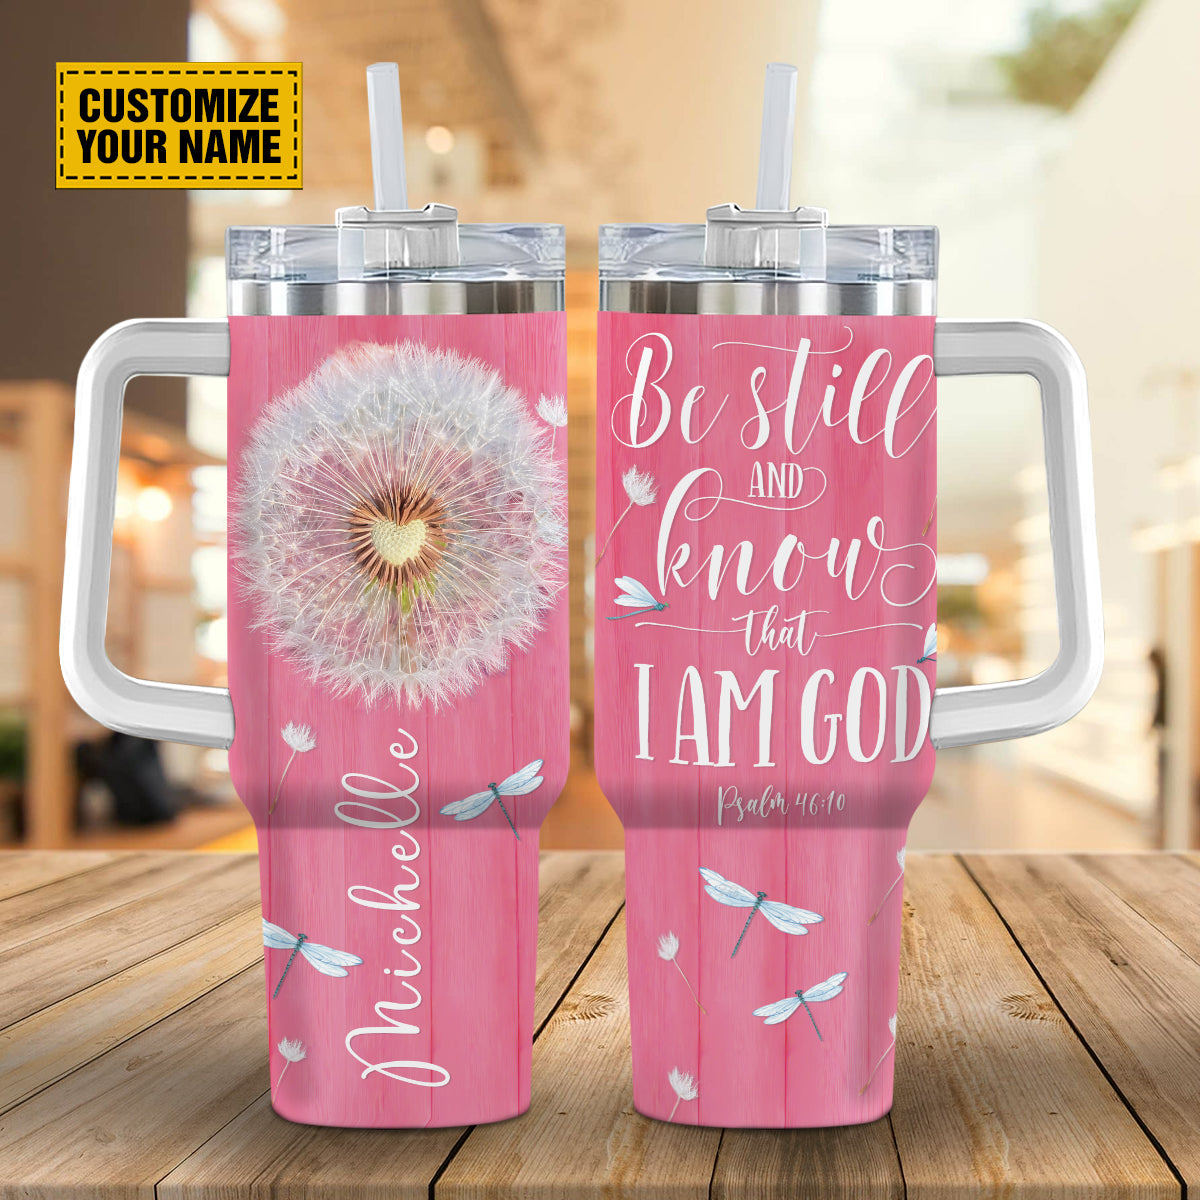 Teesdily | Customized Dandelion Dragonfly Tumbler Cups, Be Still And Know That I Am God, Christian Gifts For Women, Religious Gifts 40Oz Tumbler With Handle & Straw